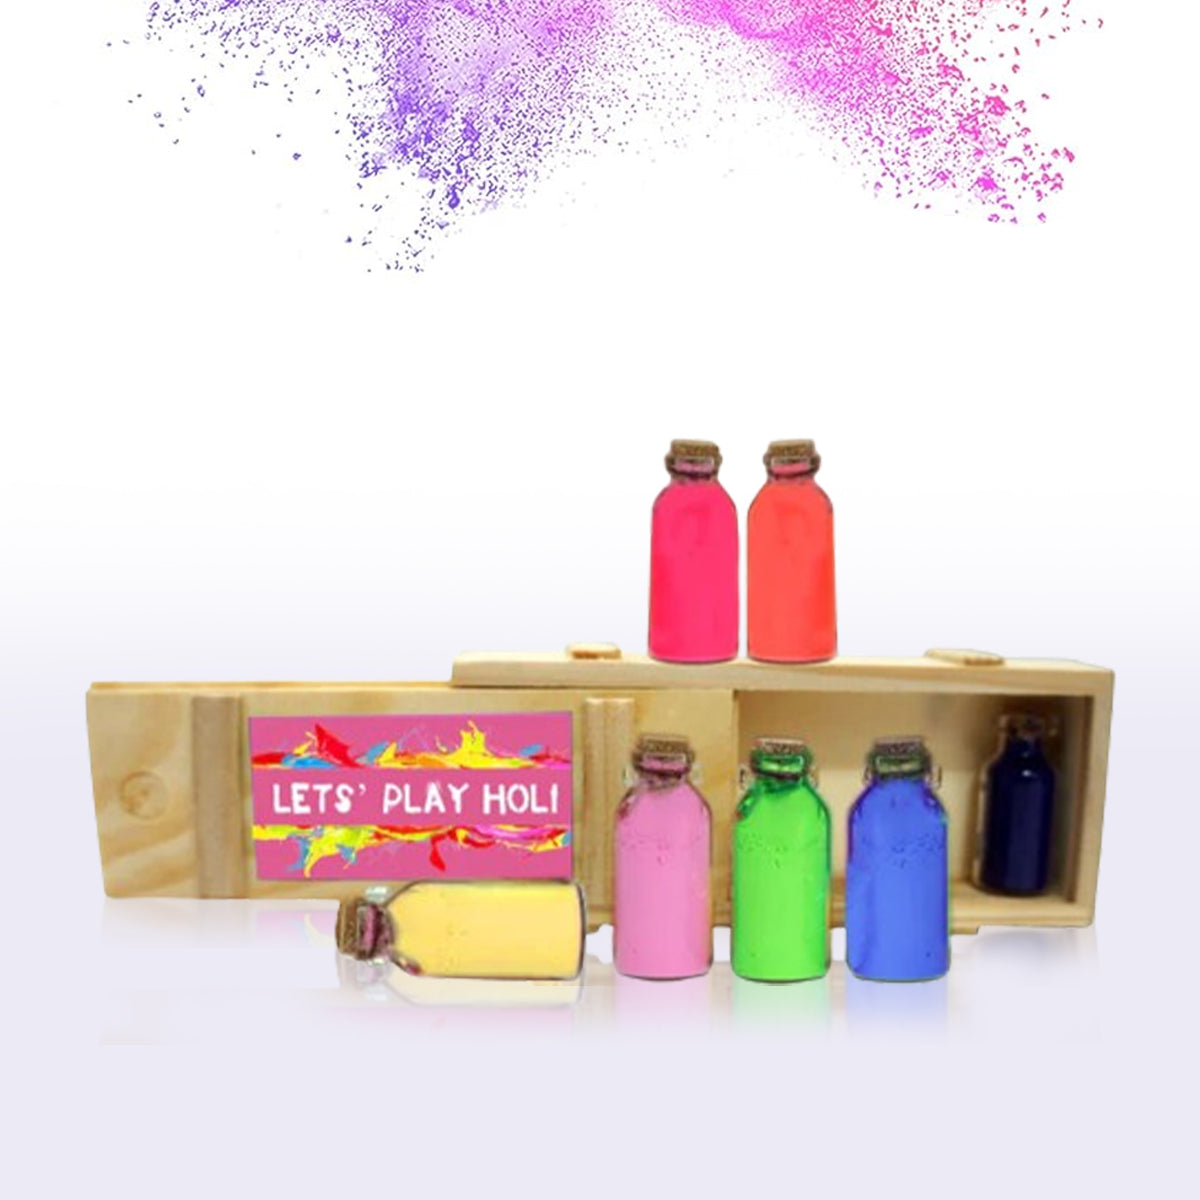 Colourful Holi Bottles in A Box